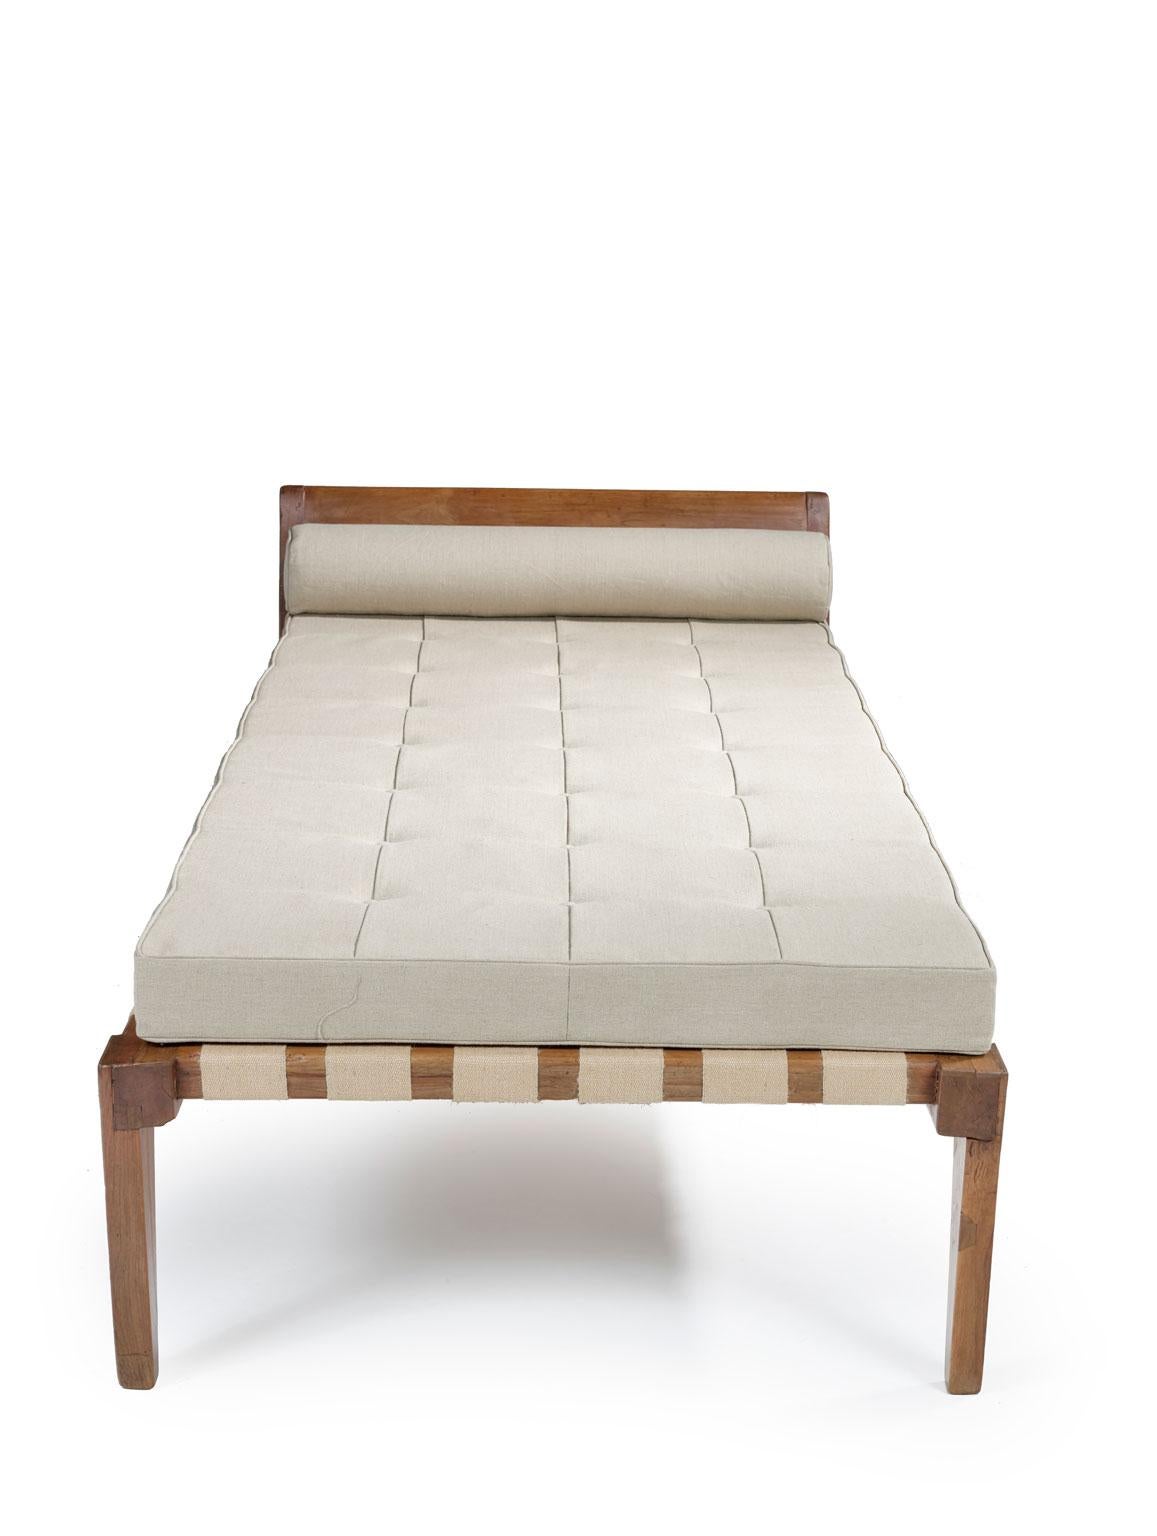 Mid-20th Century Pierre Jeanneret, Bed PJ-L-03-A, circa 1957